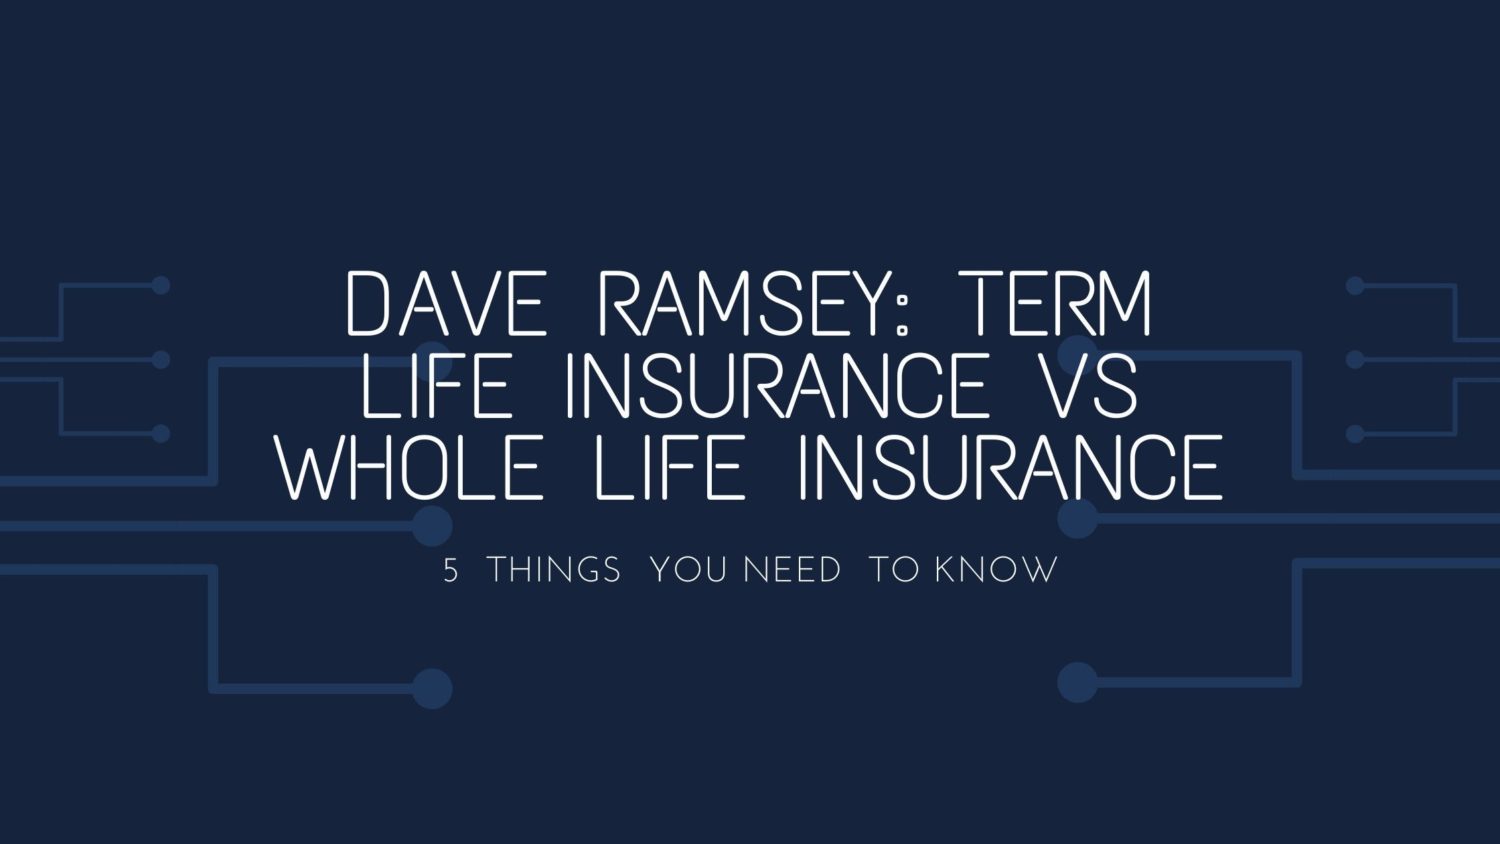 Why Does Dave Ramsey Not Like Whole Life Insurance?